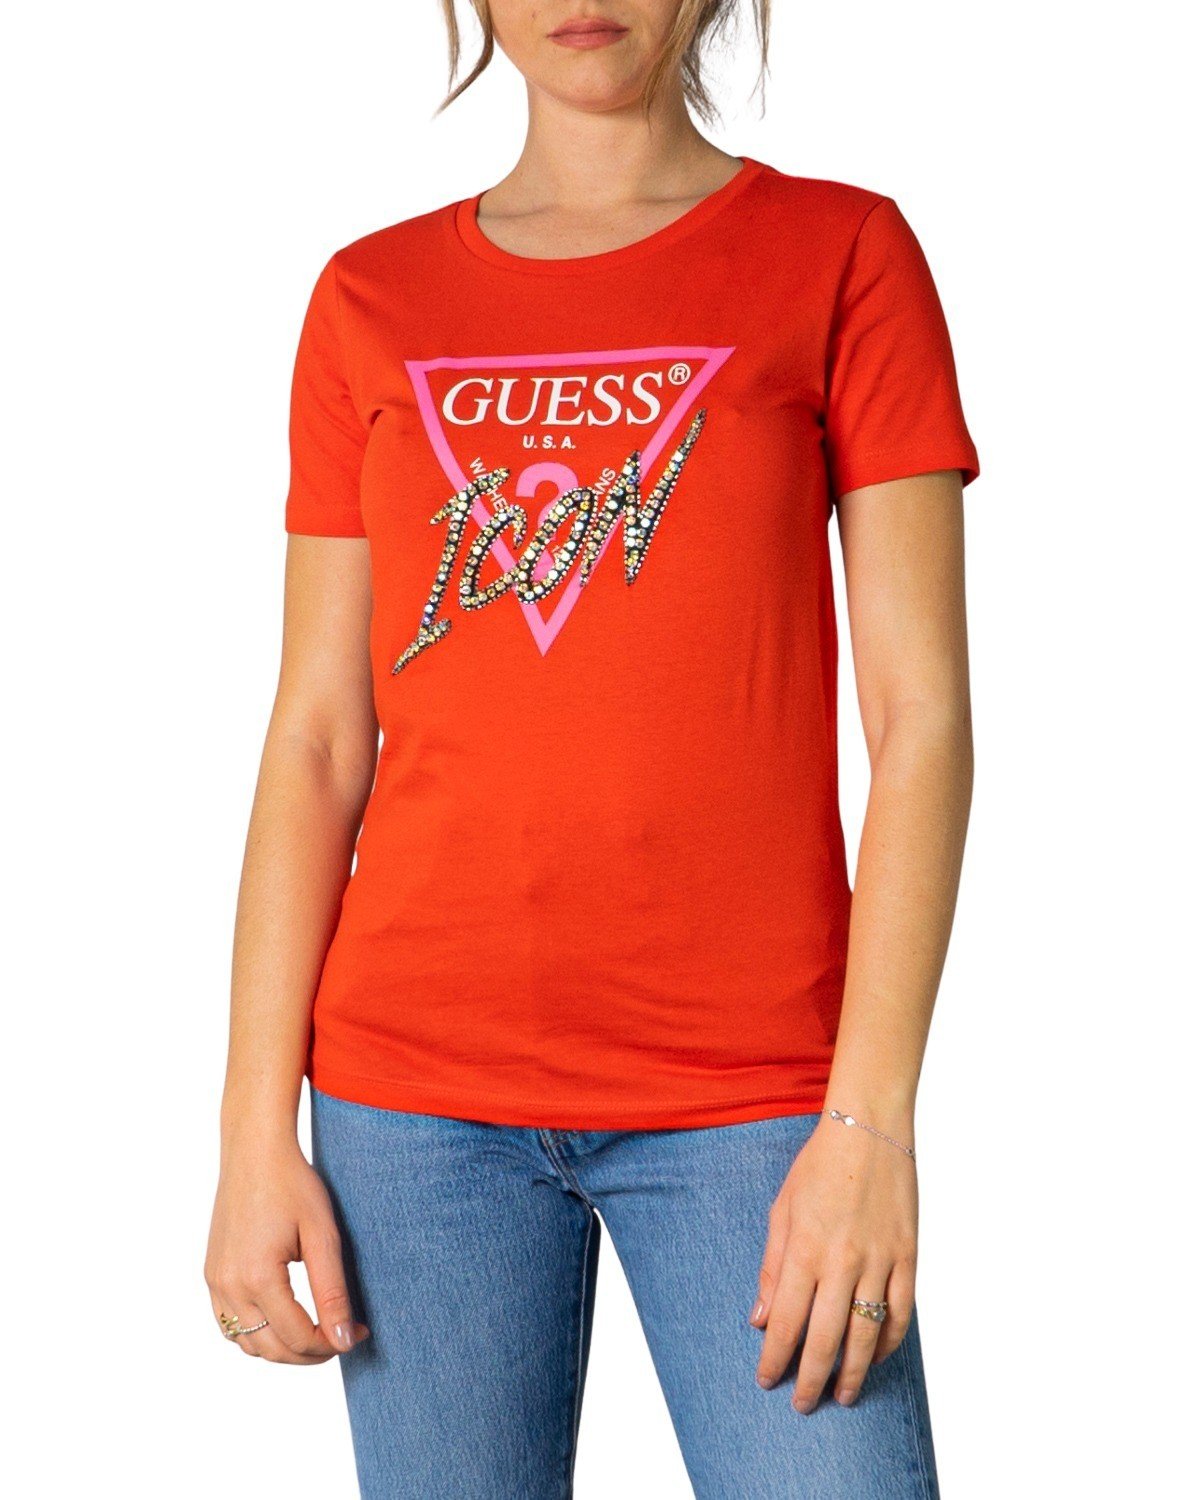 Guess Women's T-Shirt Various Colours 217643 - red XS